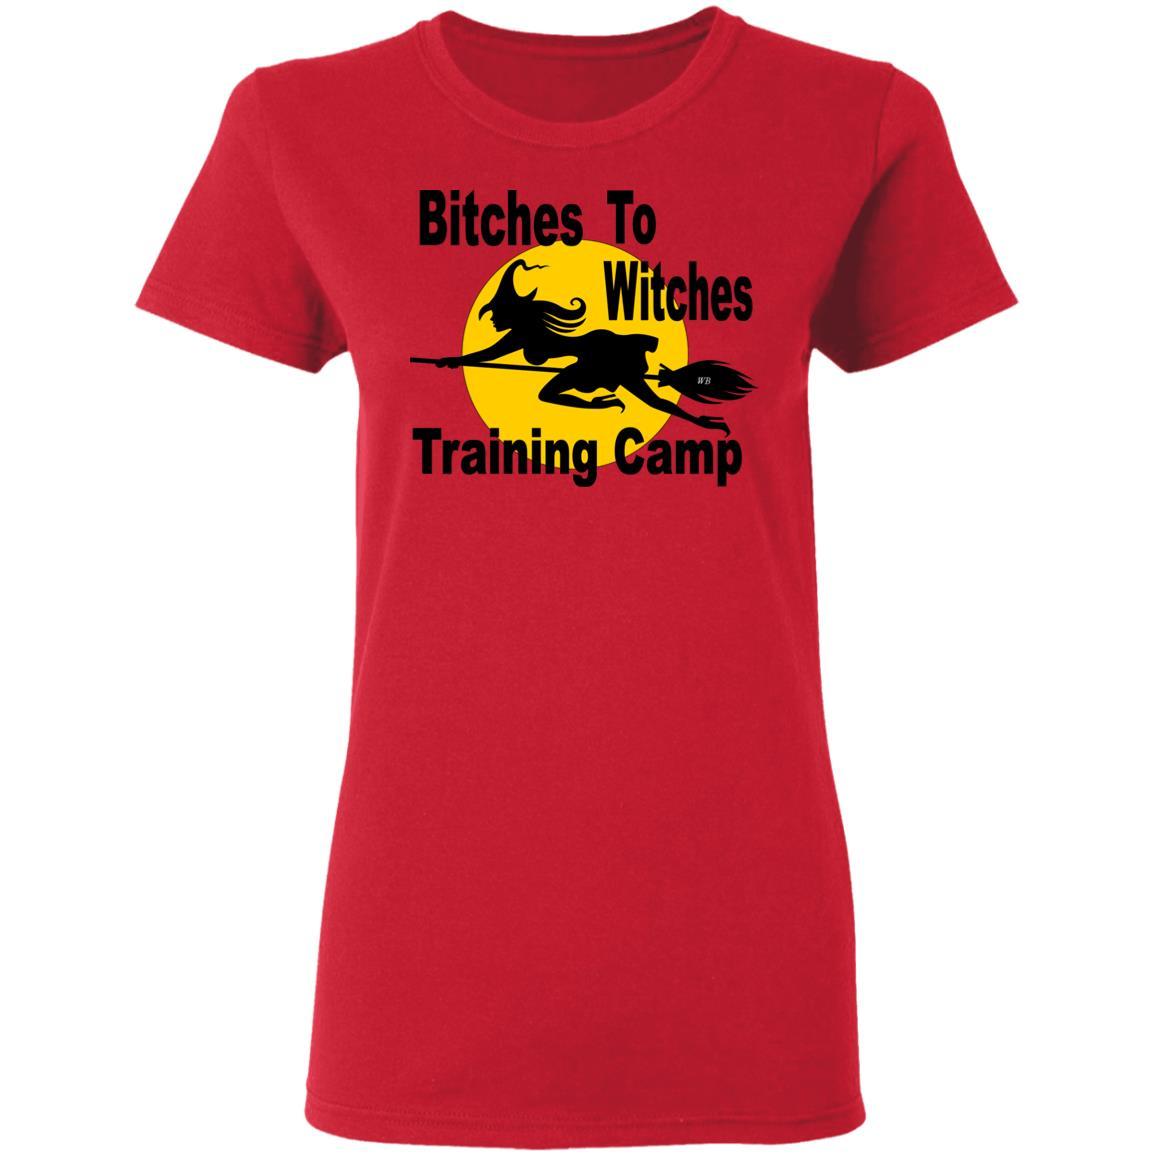 T-Shirts Red / S WineyBitches.Co "Bitches To Witches Training Camp" Halloween Ladies' 5.3 oz. T-Shirt WineyBitchesCo